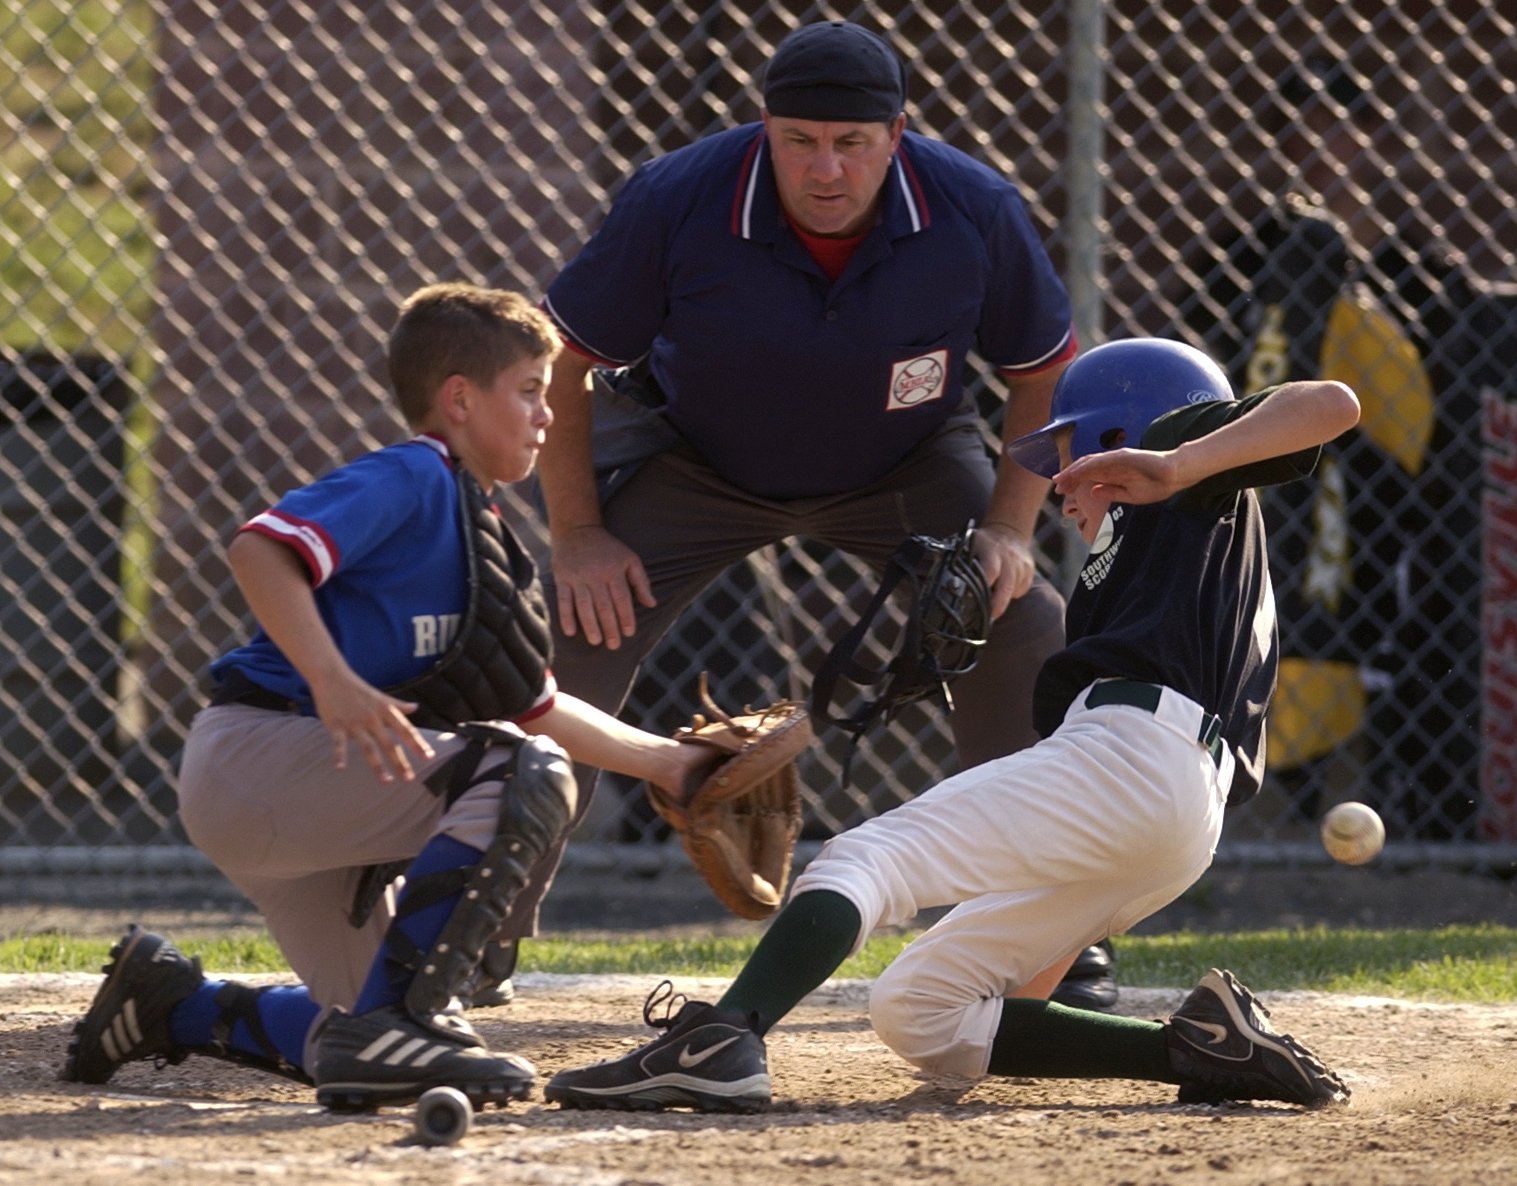 Controversial coaching move mars Little League regional game